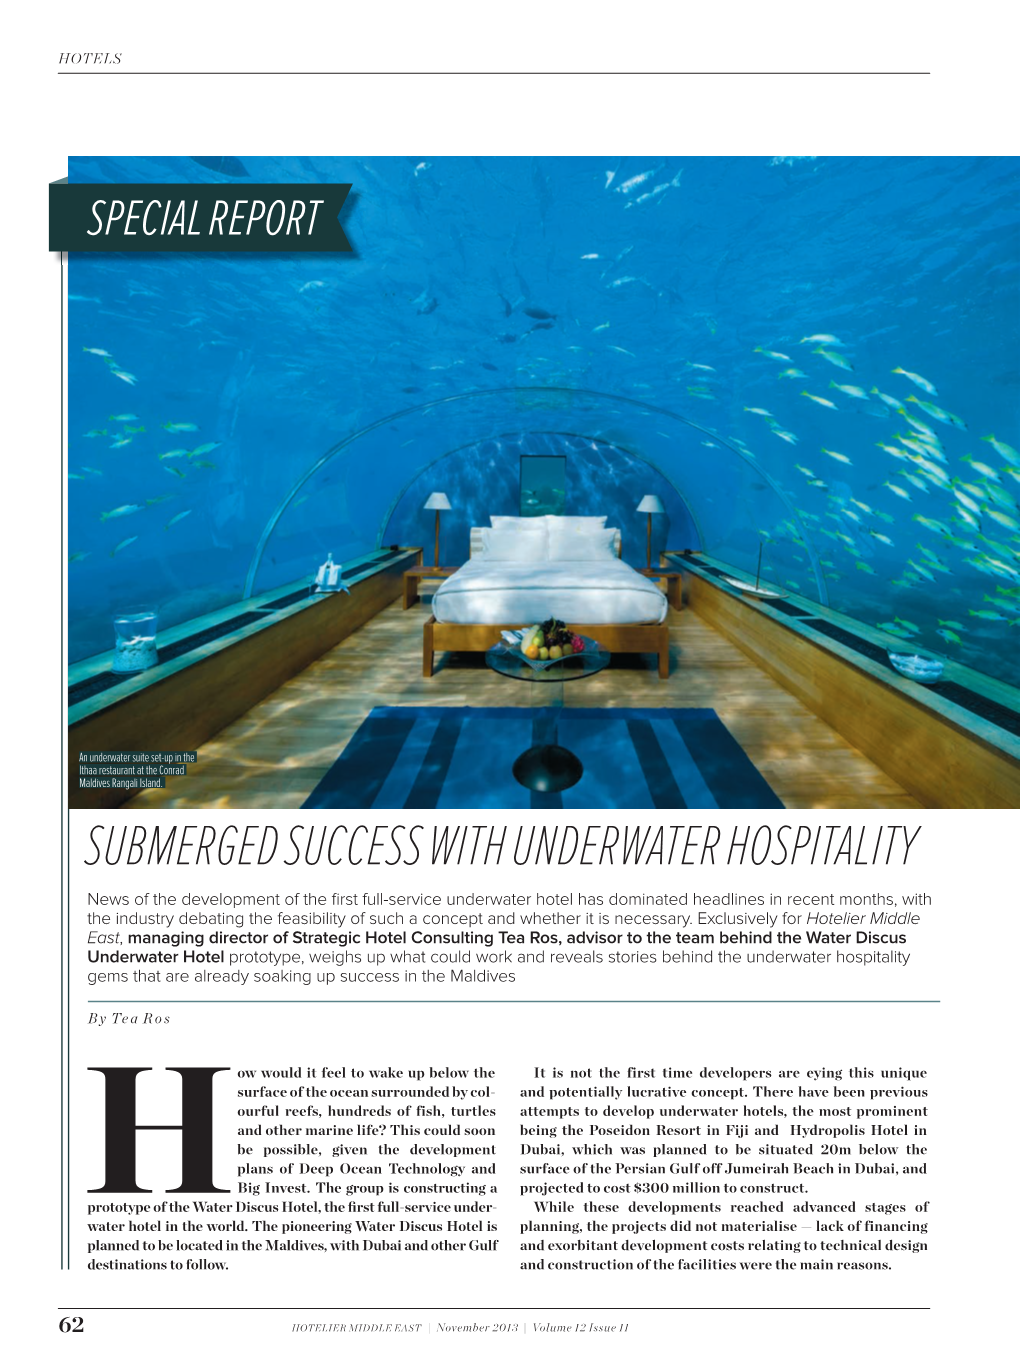 Submerged Success with Underwater Hospitality